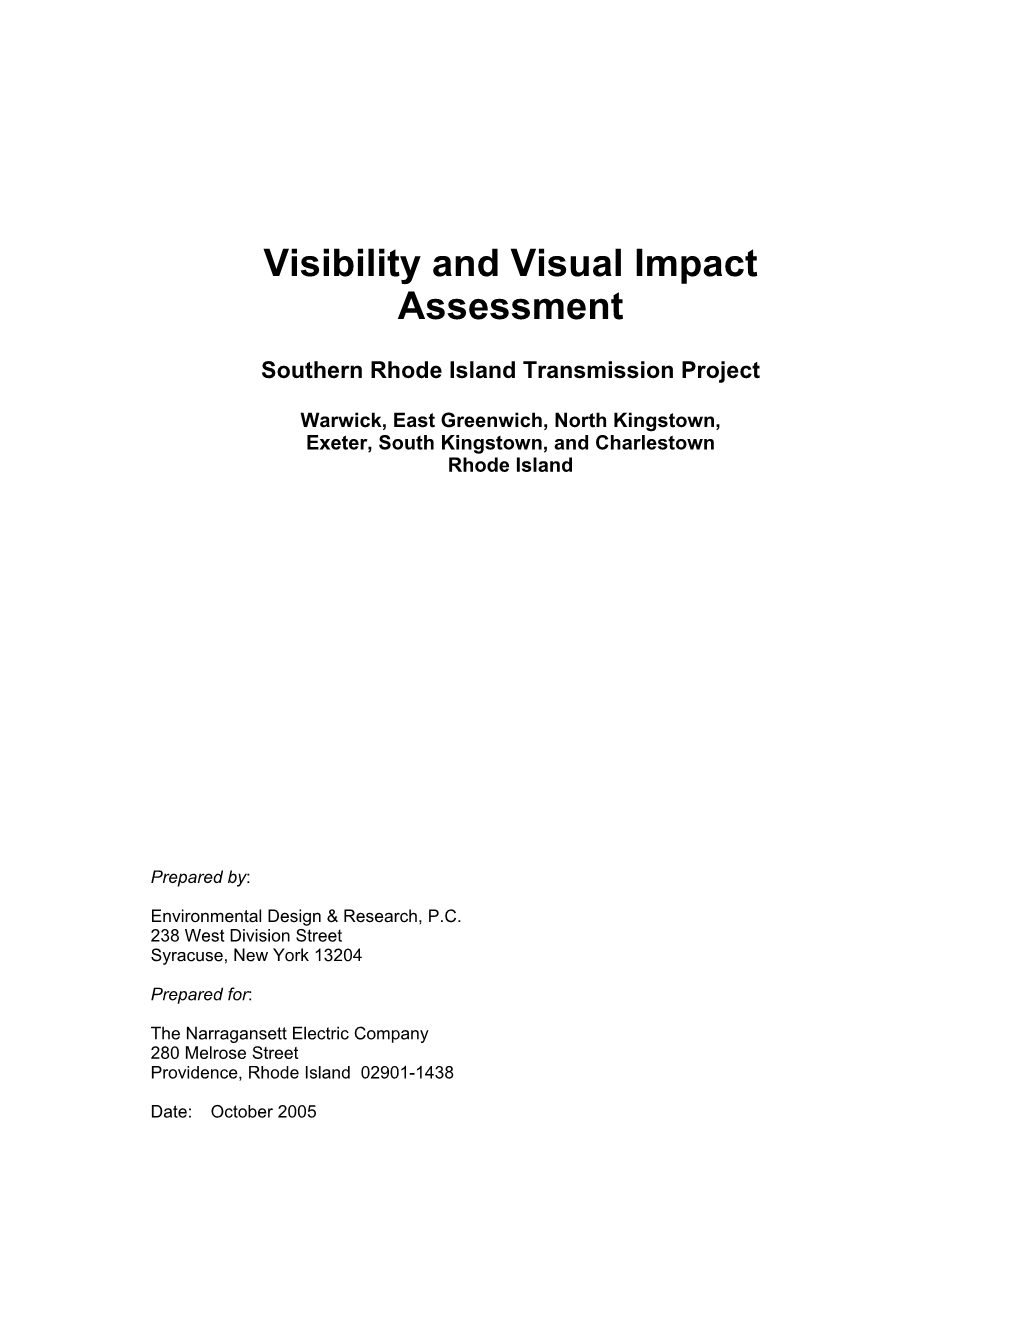 Visibility and Visual Impact Assessment Report